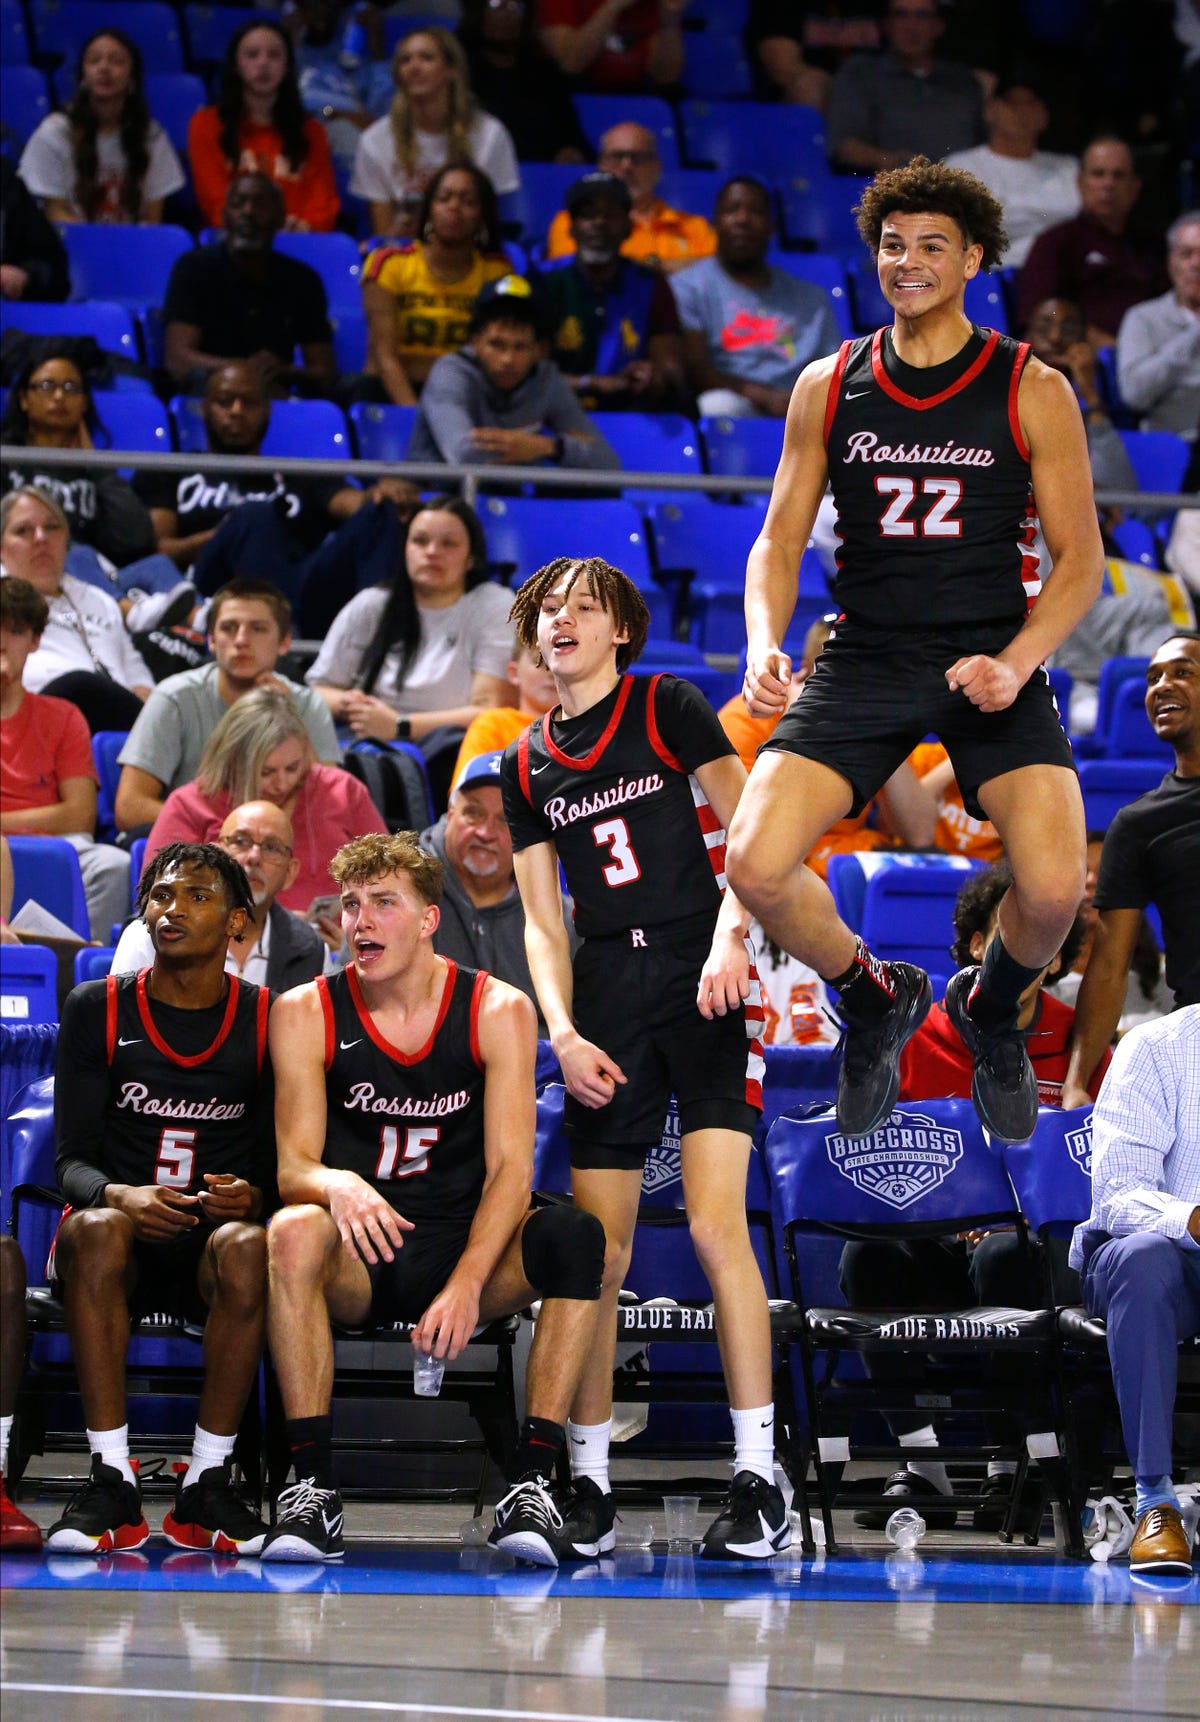 Rossview Basketball Sails into TSSAA Semifinals with Thrilling Win